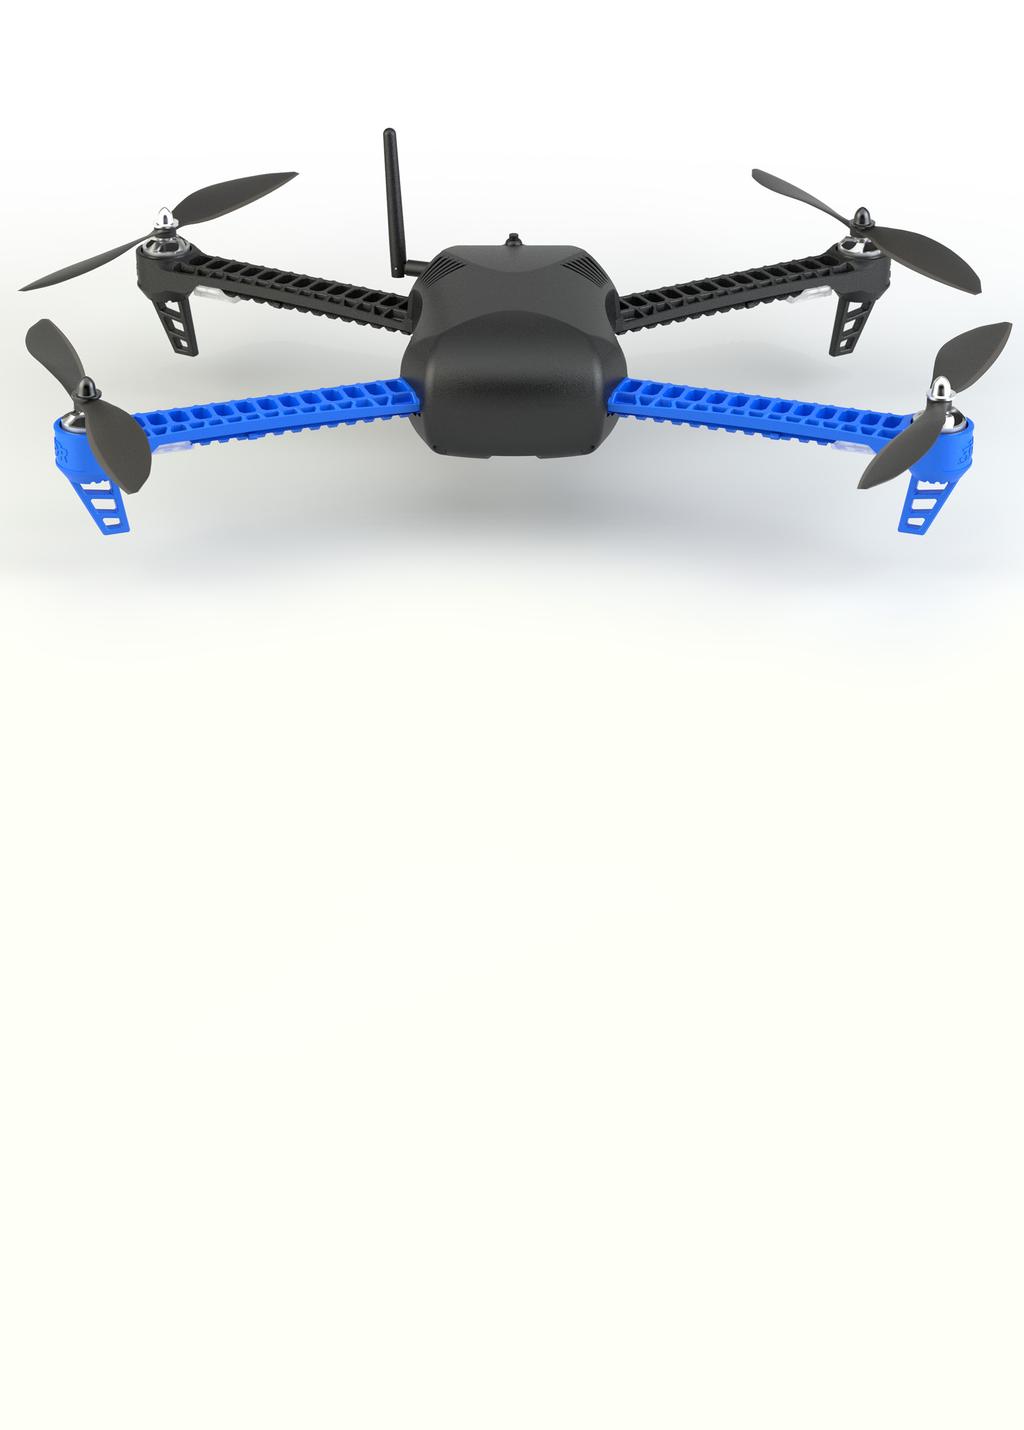 Meet IRIS +. Thank you for purchasing IRIS +. IRIS is a personal aerial imaging platform powered by open-source hardware, software, and firmware.